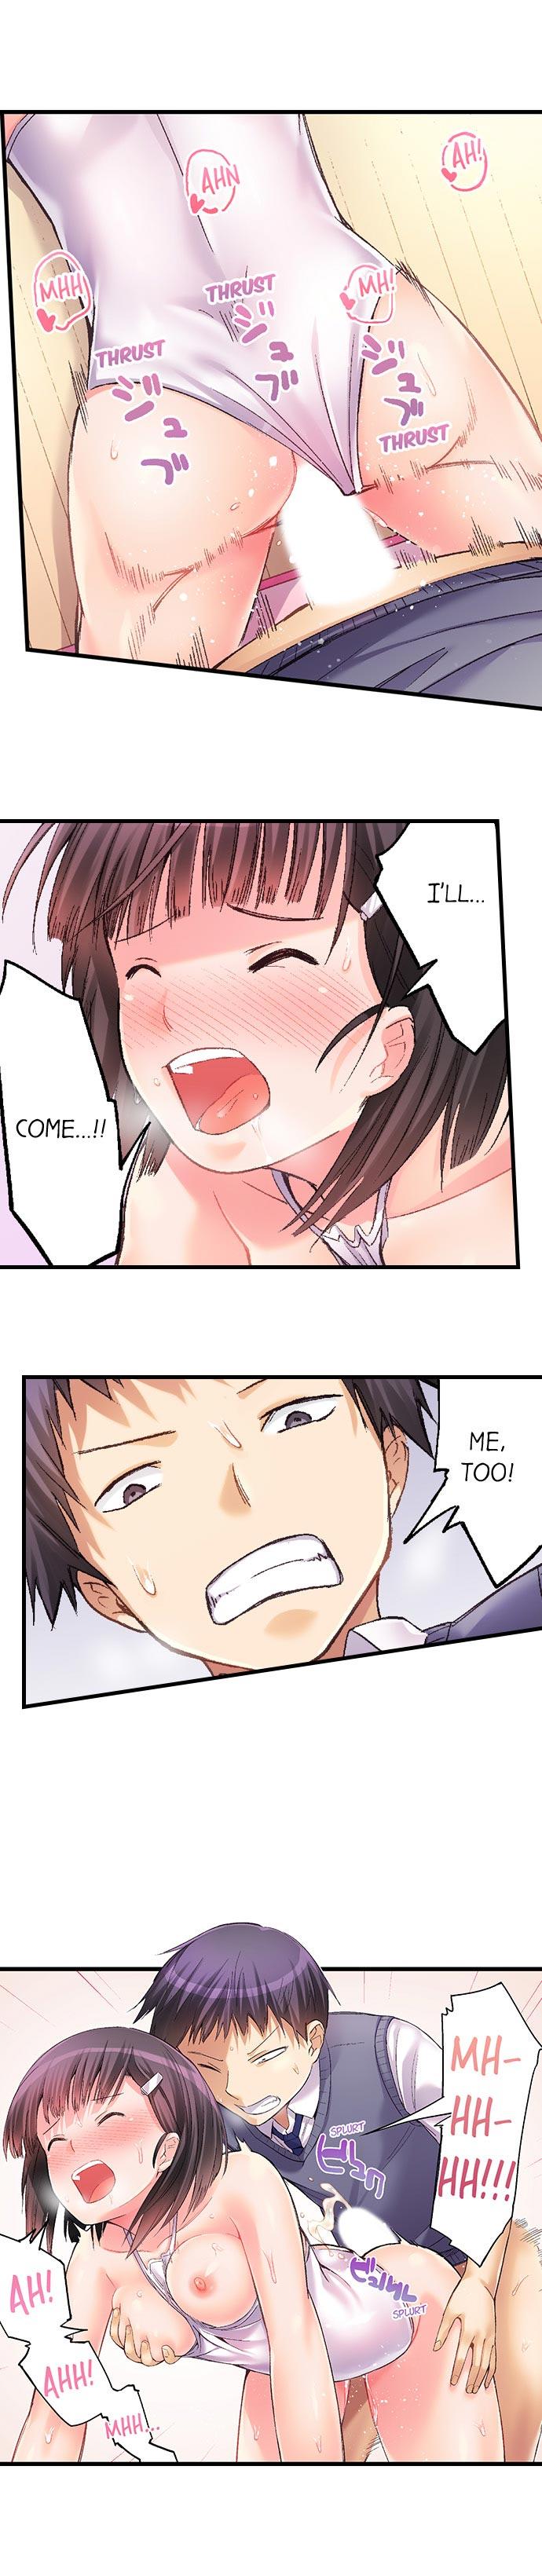 No Panty Booty Workout! Ch. 1 - 15 53